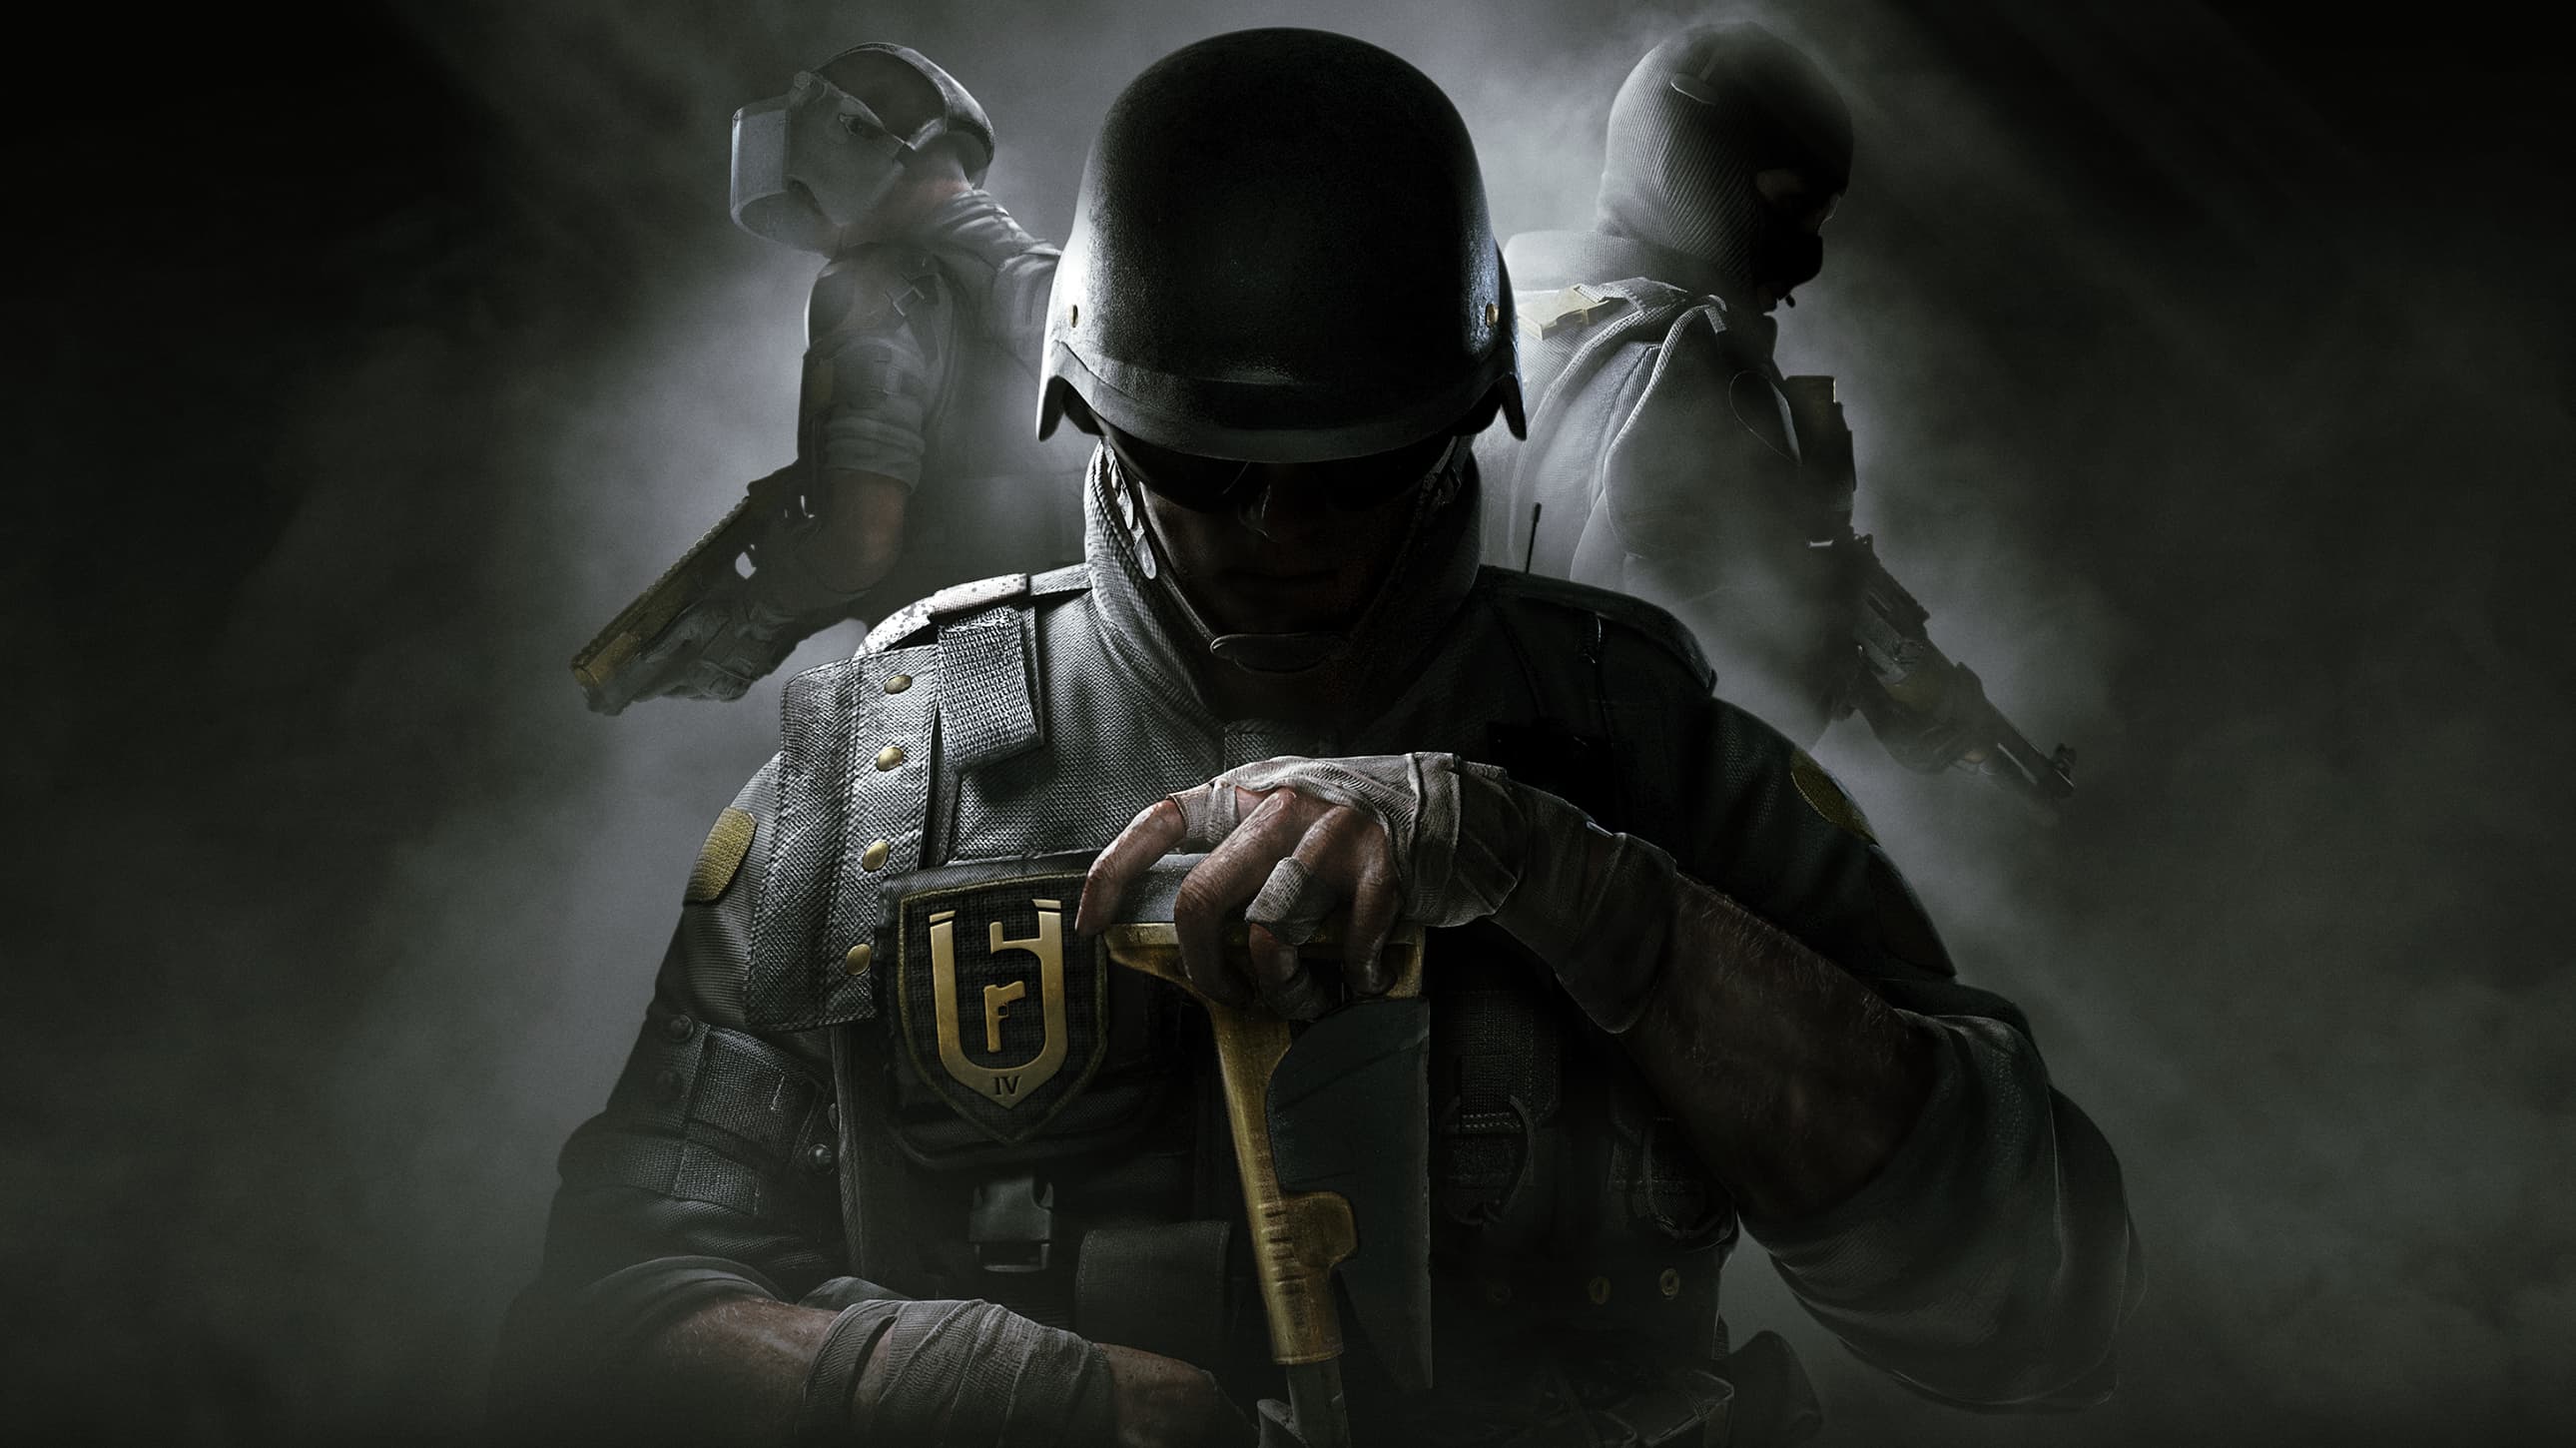 Apple and Google are being sued over Rainbow Six: Siege clone